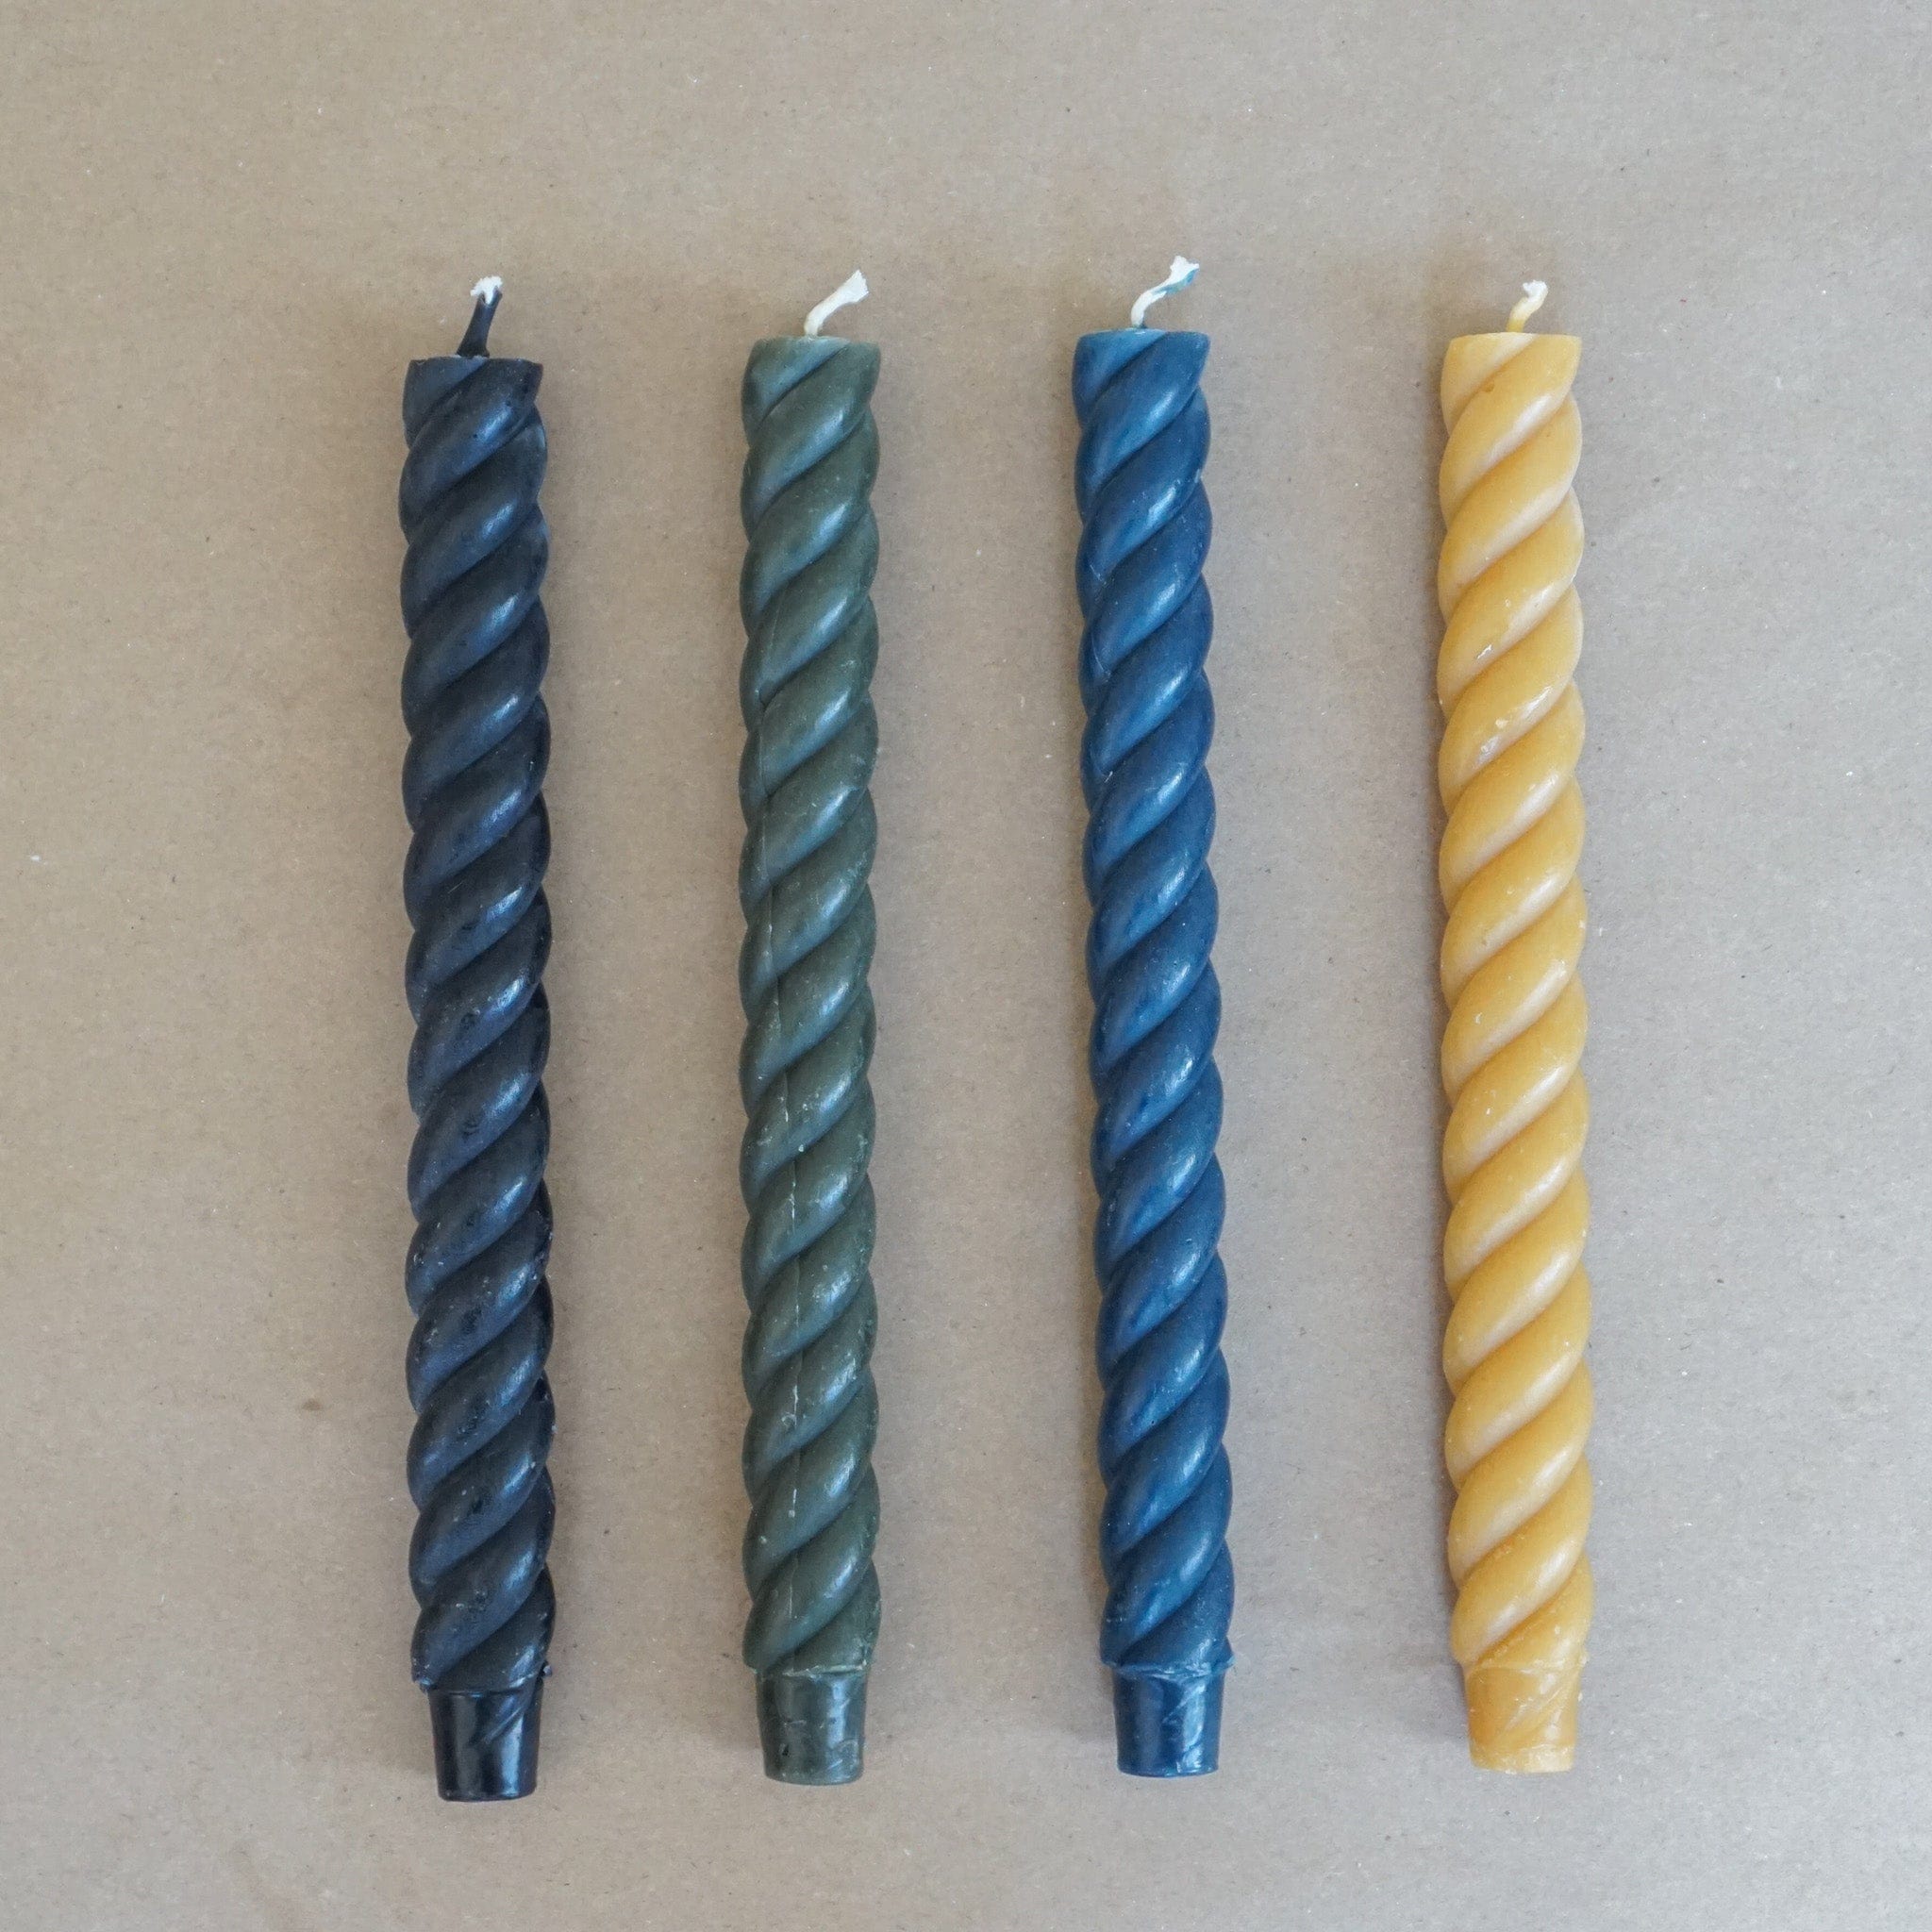 GREENTREE CANDLES Decor Rope Taper Greentree Candles - Blue Slate